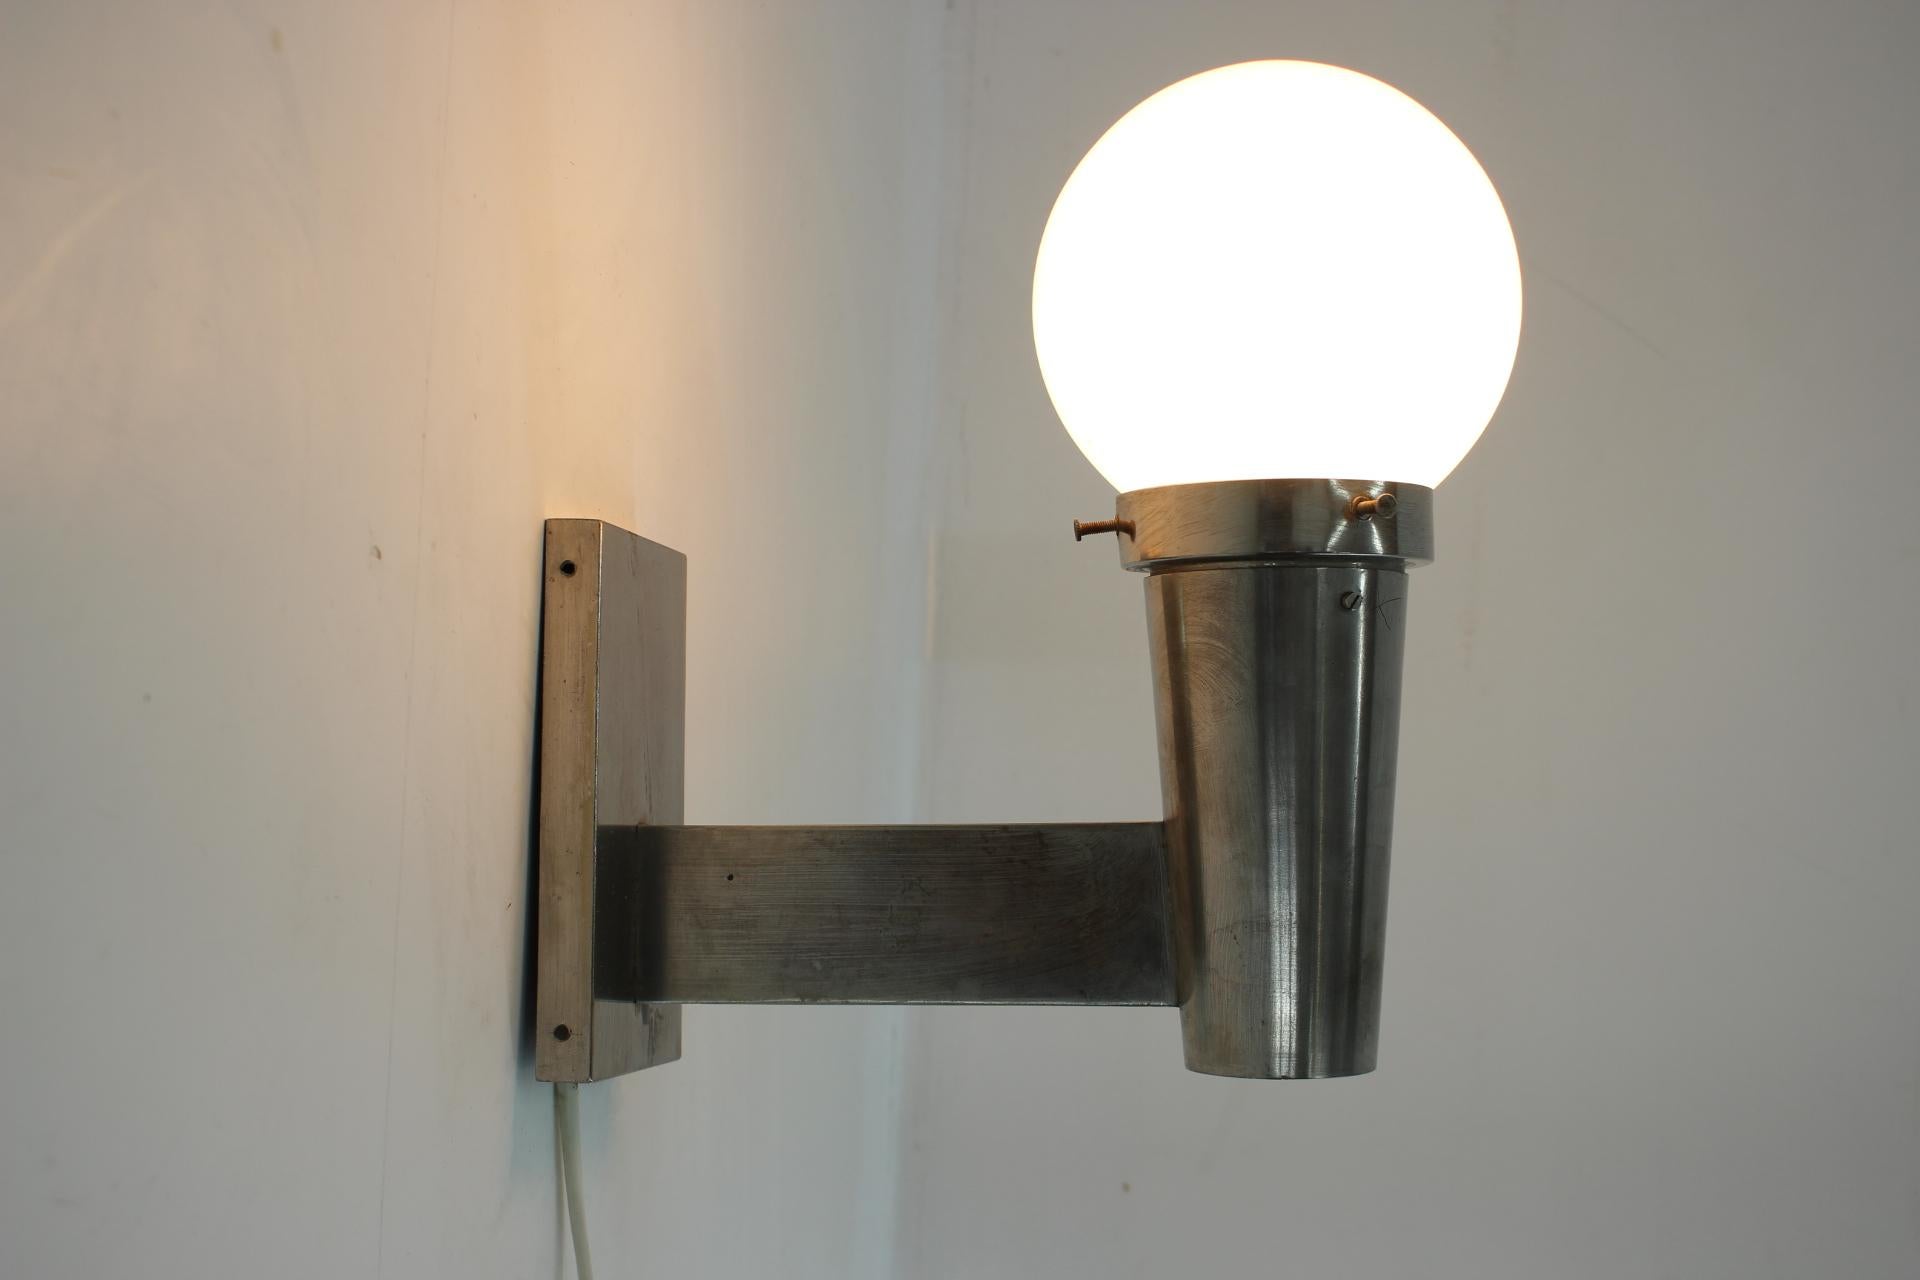 Czech Pair of Bauhaus Chrome Wall Lamps/Scones, 1930s For Sale